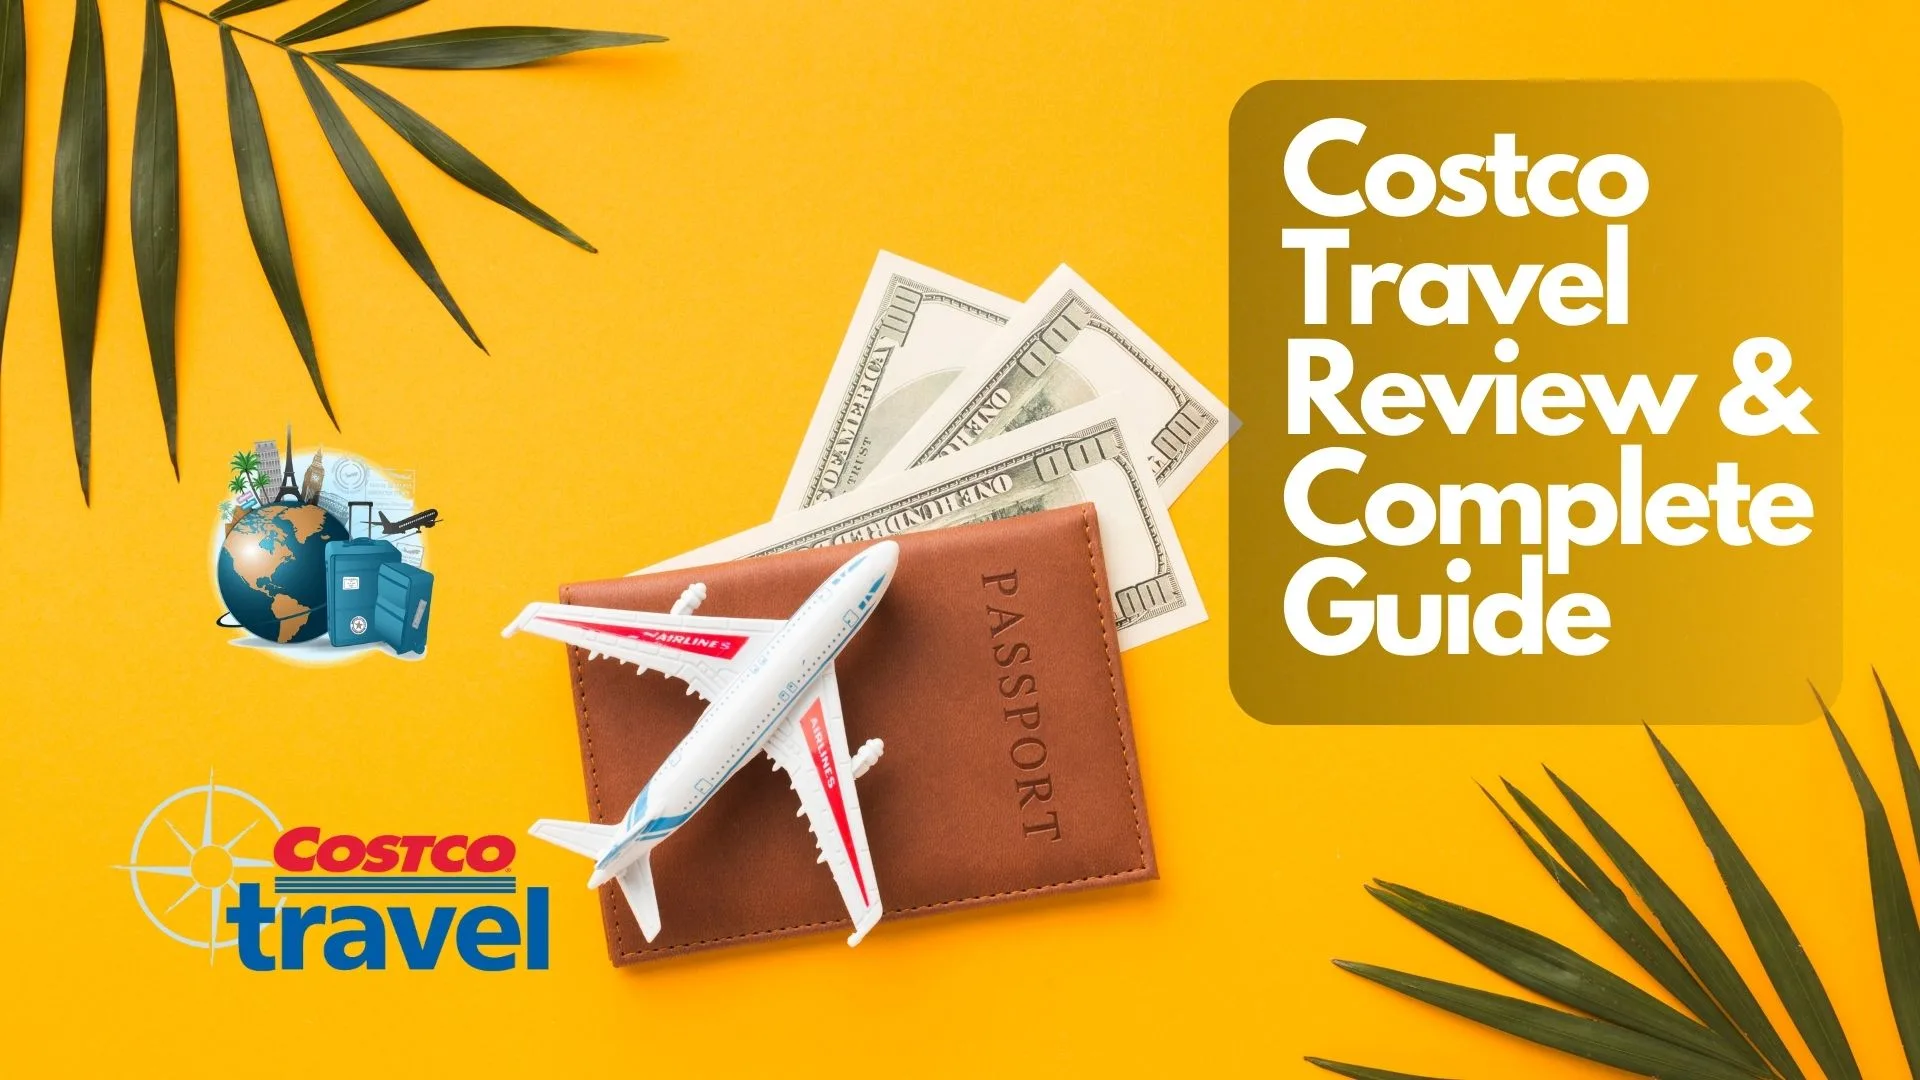 travel discounts with costco